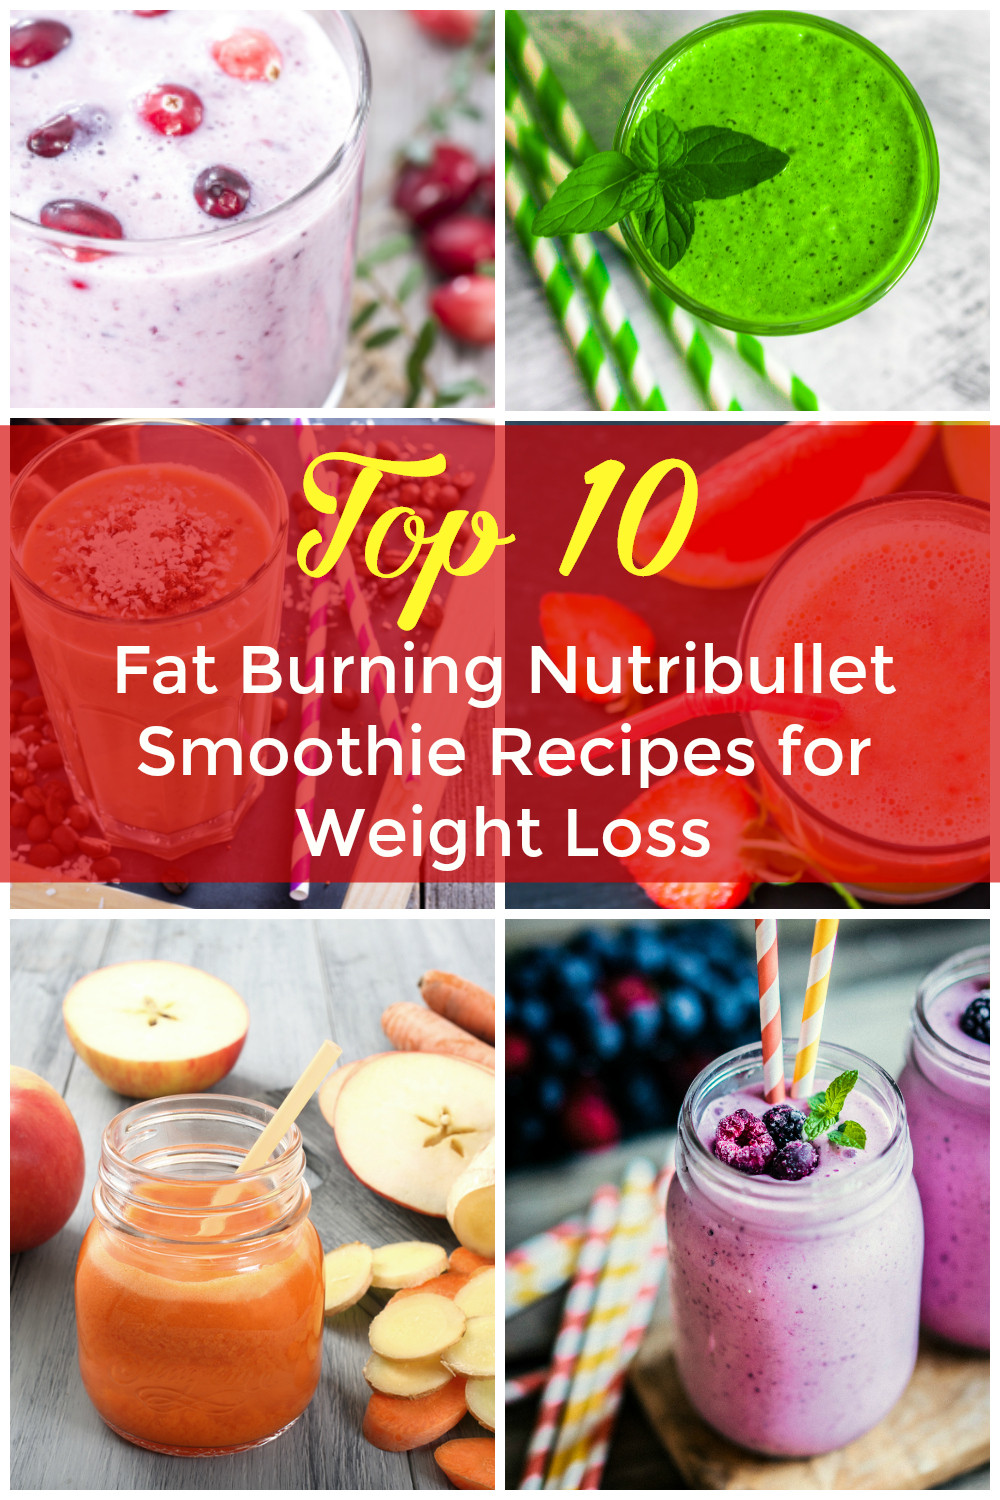 Magic Bullet Smoothies
 Magic bullet smoothie recipes for weight loss